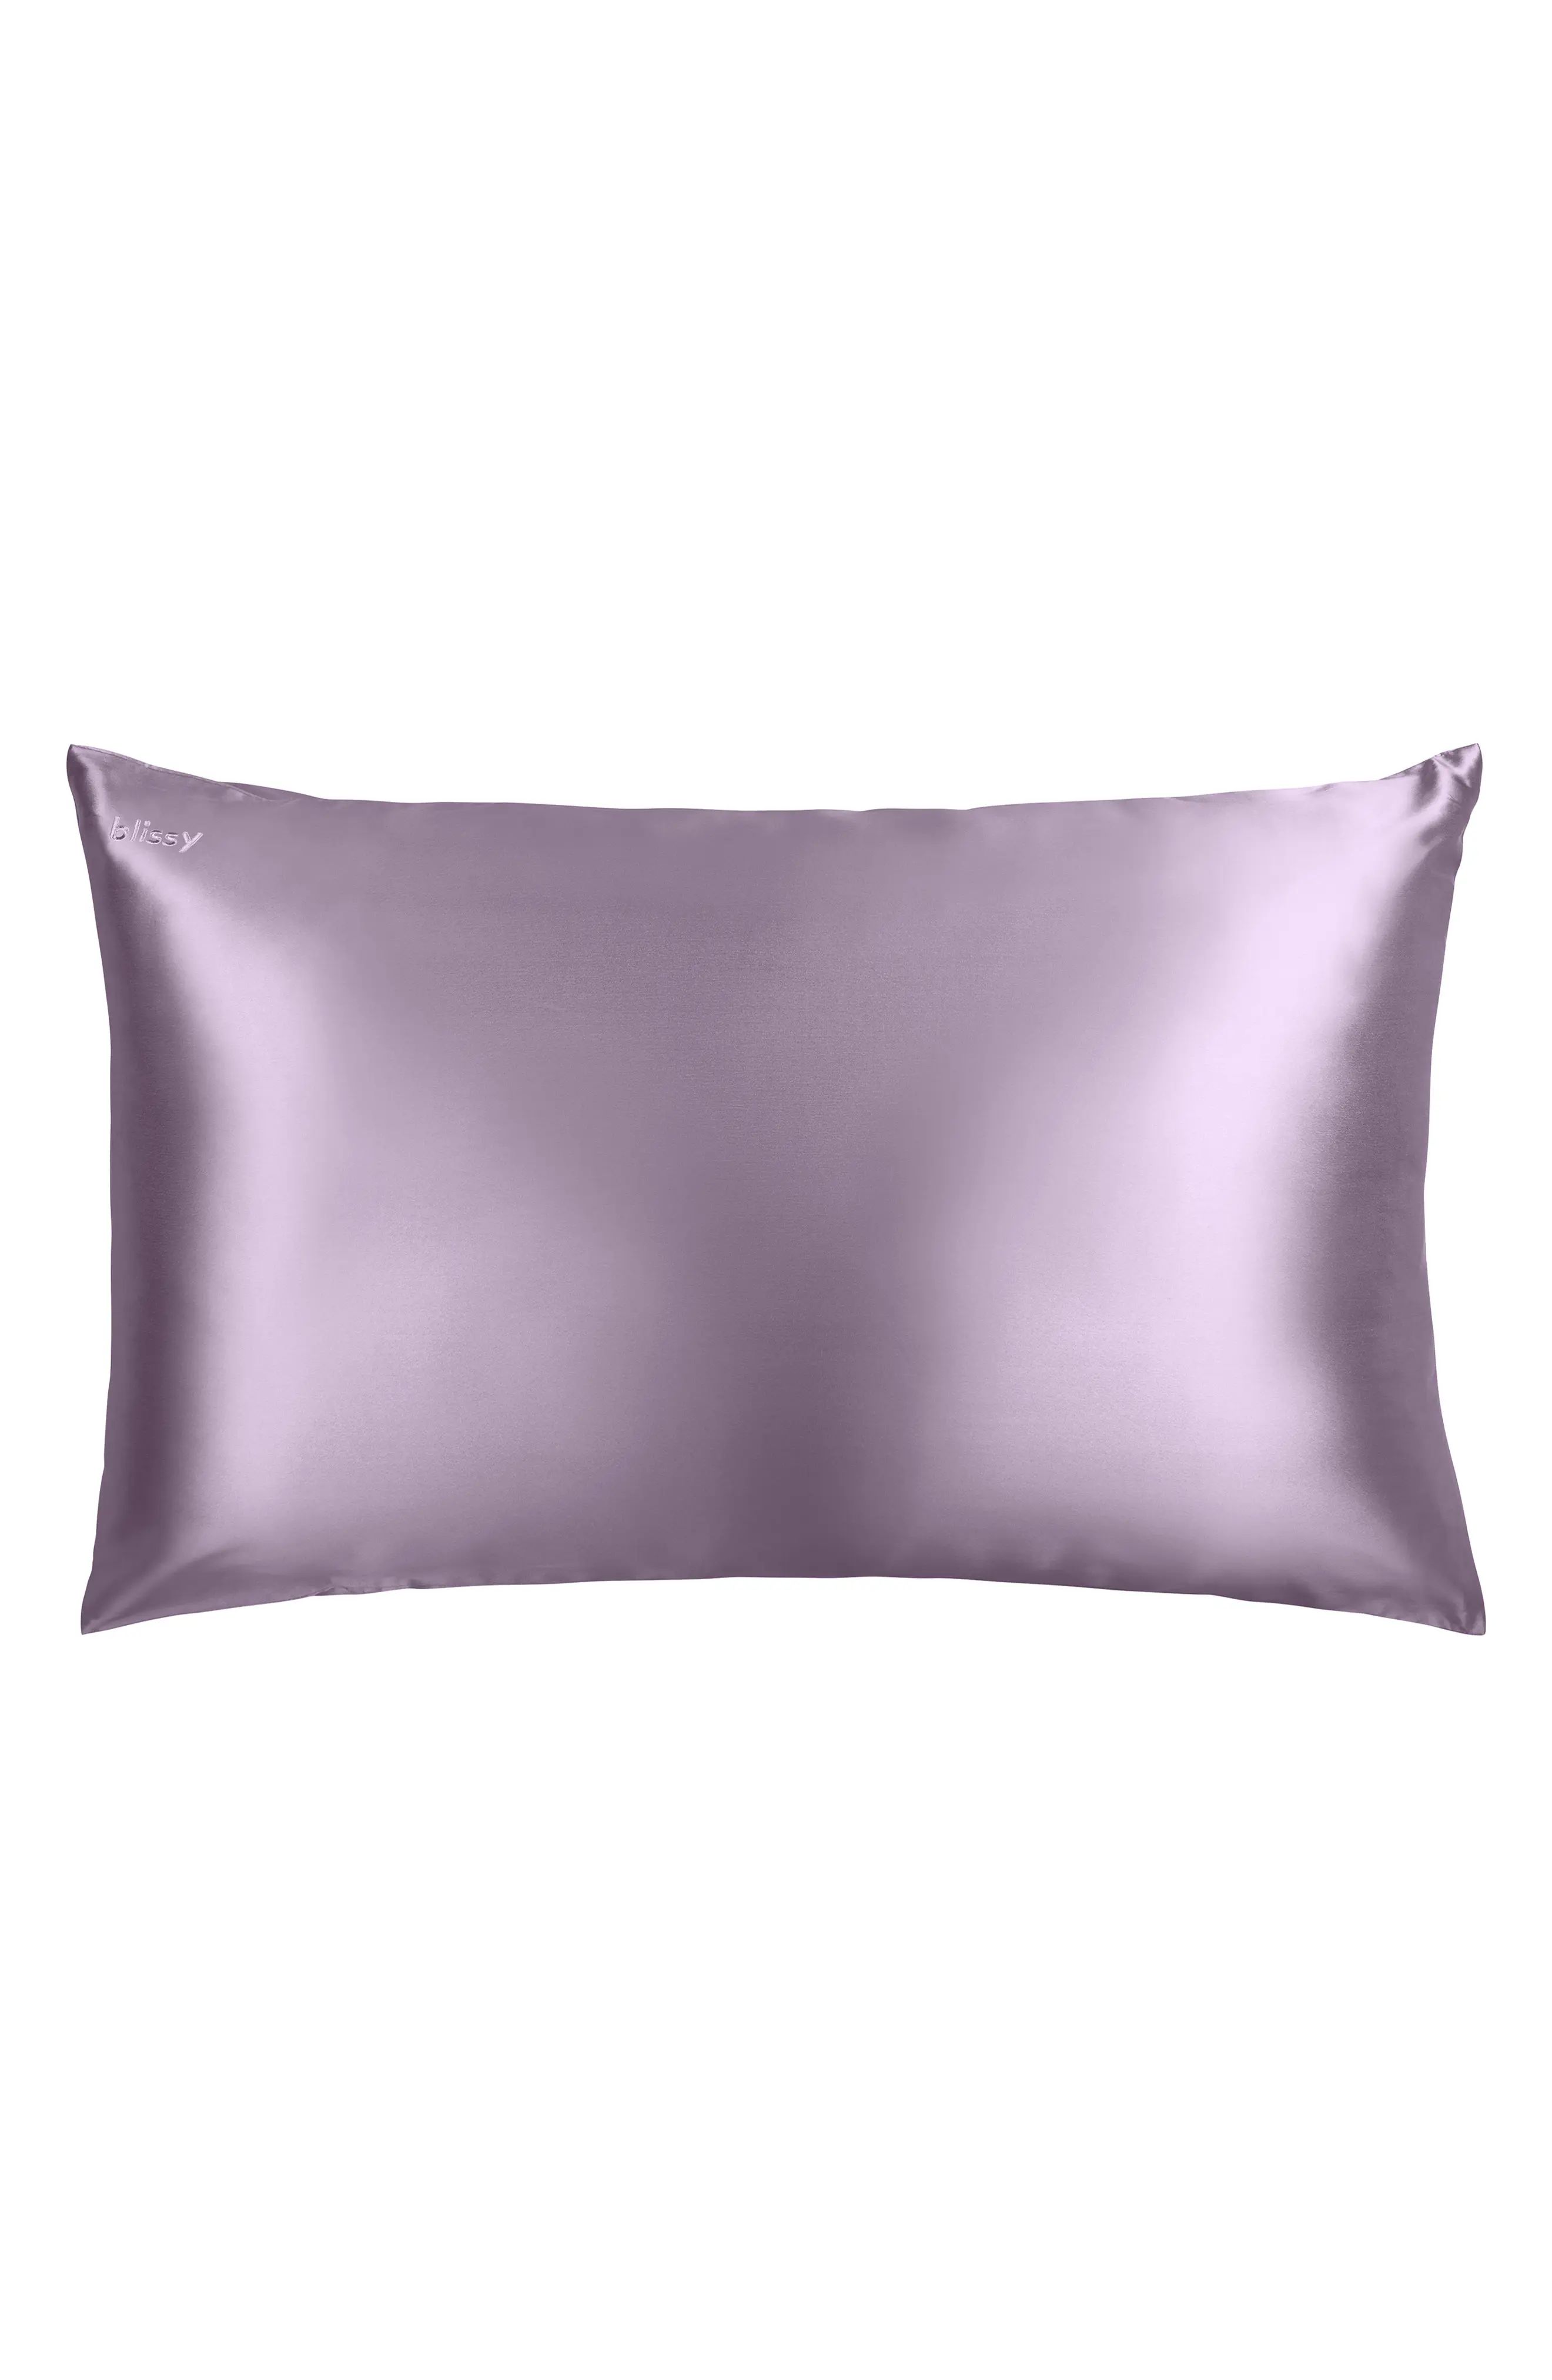 BLISSY Mulberry Silk Pillowcase in Lavender at Nordstrom, Size King | Nordstrom